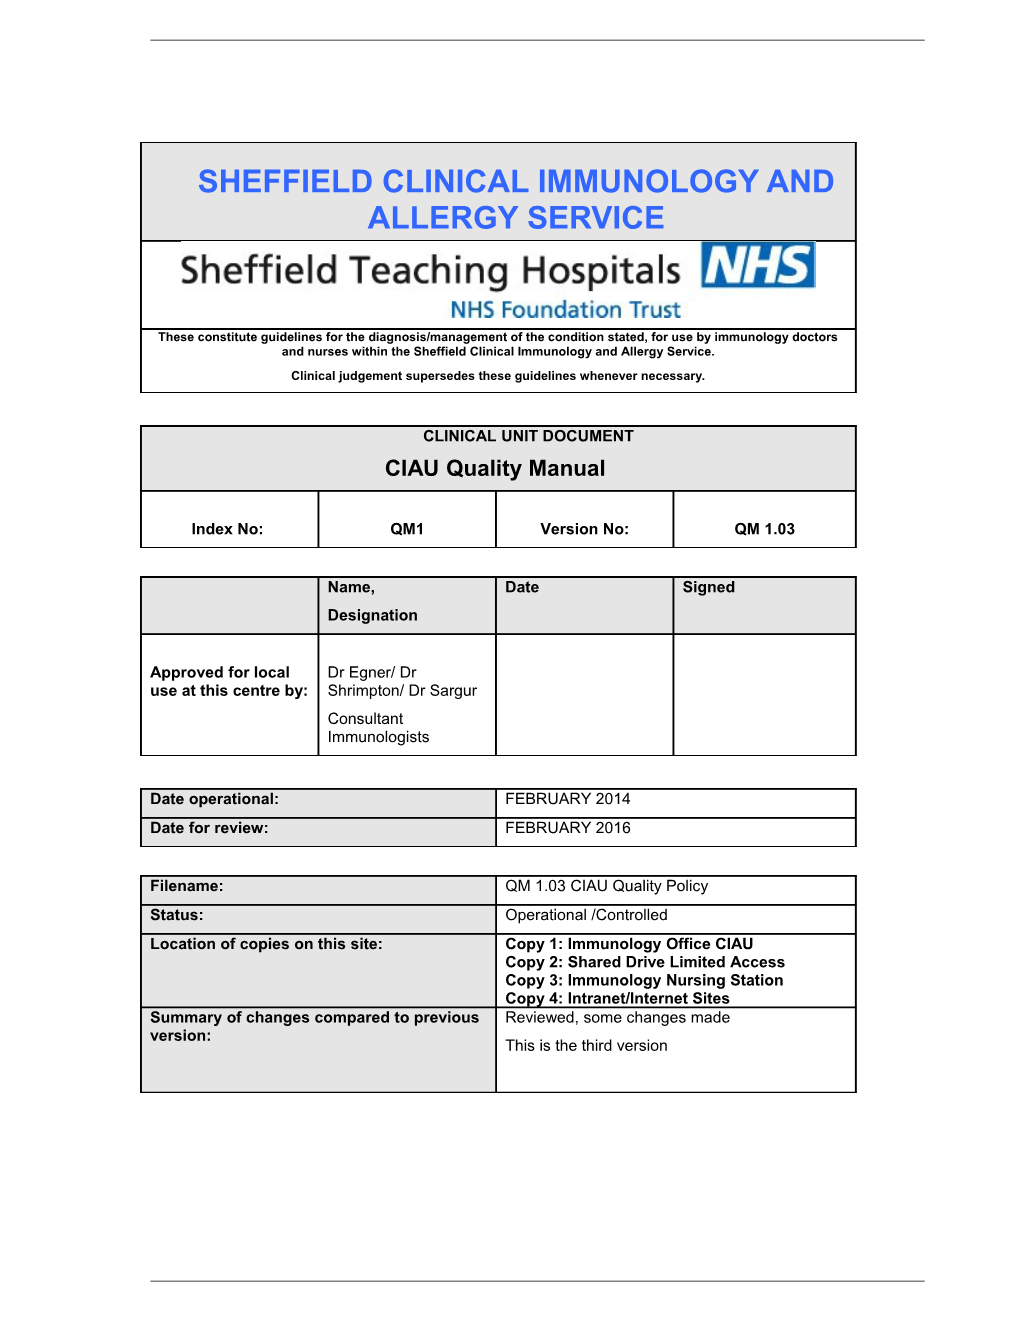 Sheffield Clinical Immunology and Allergy Service